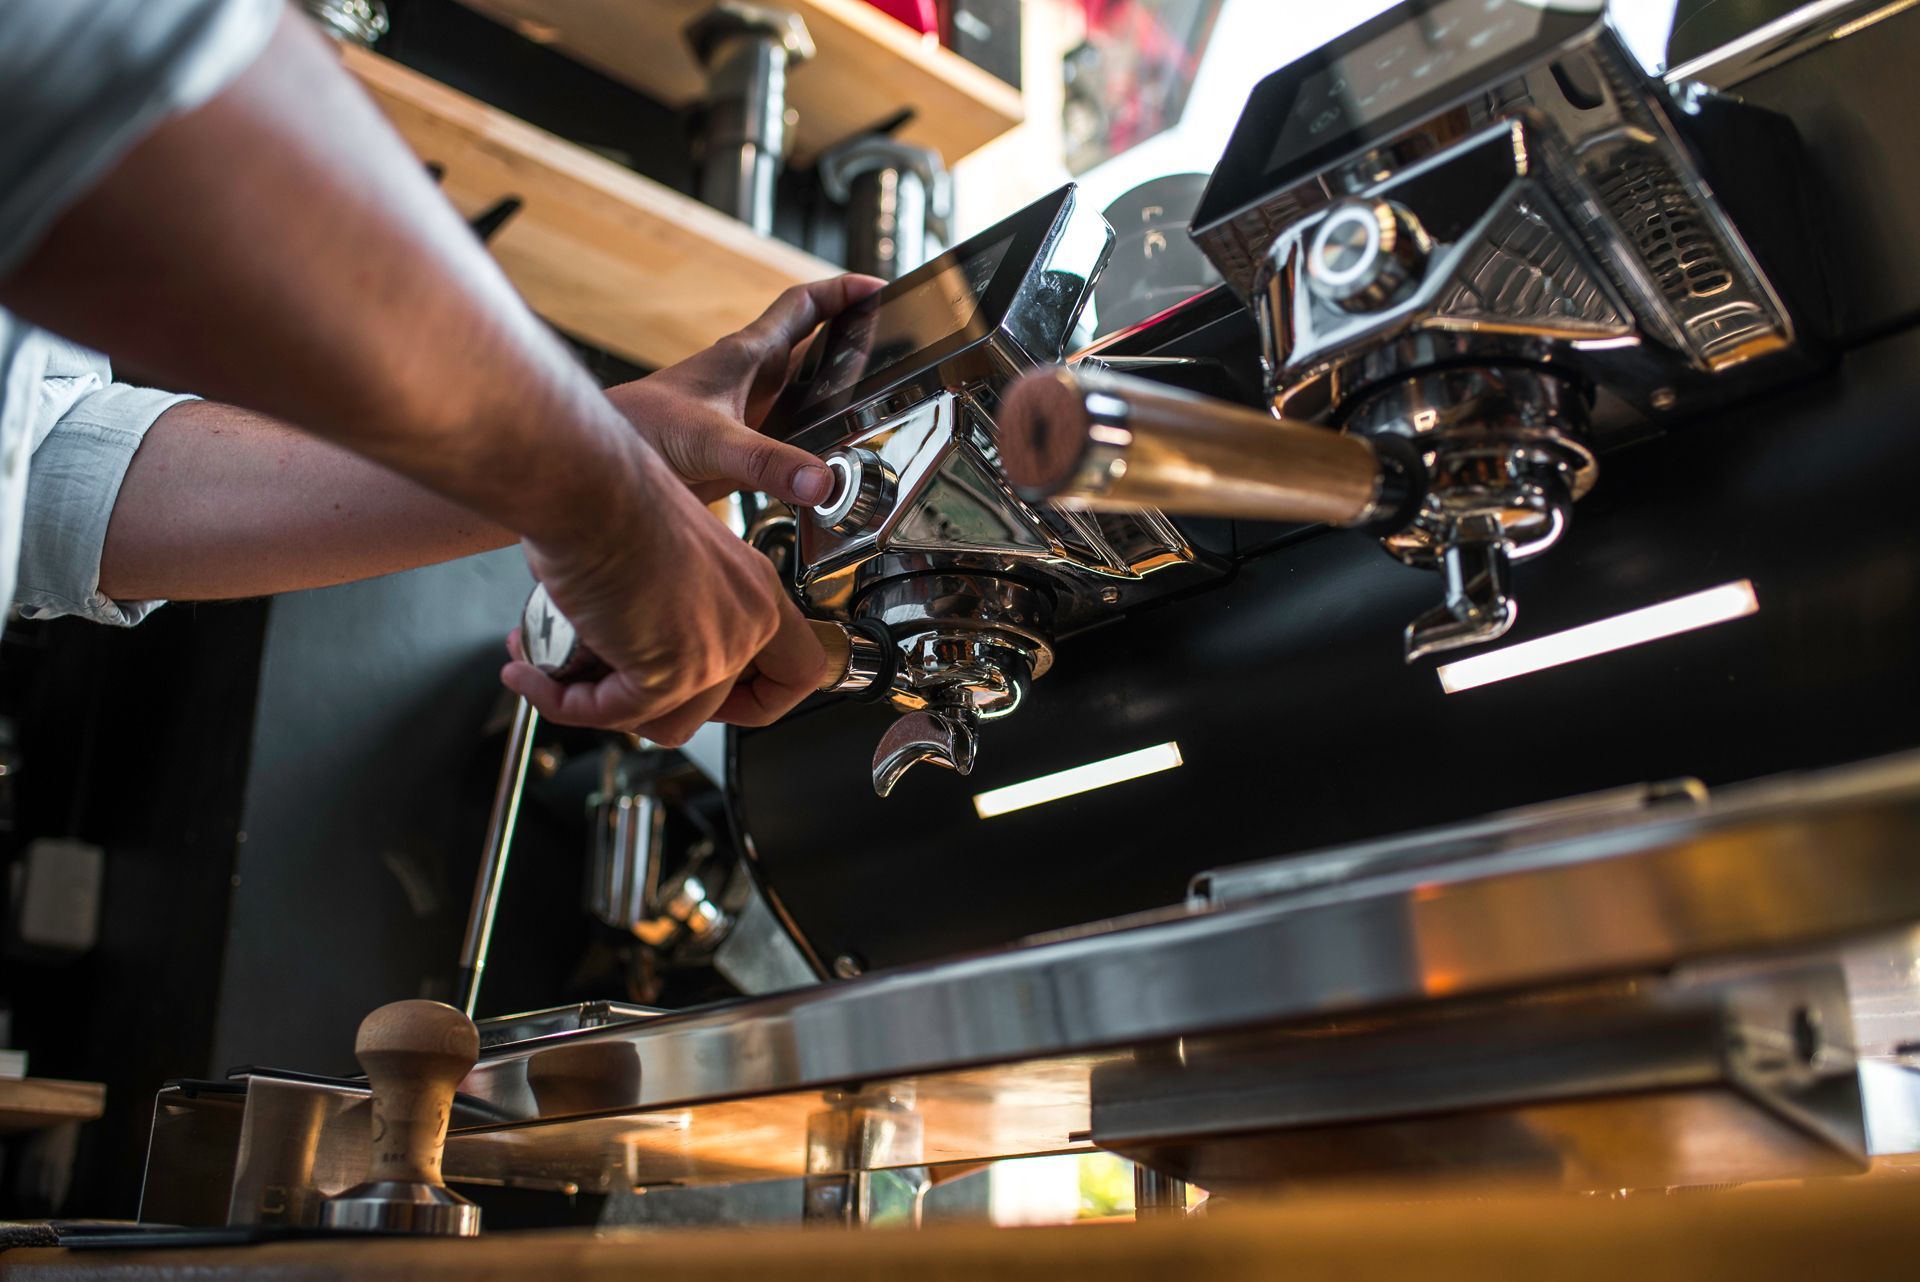 A man is working on a coffee machine in a restaurant.